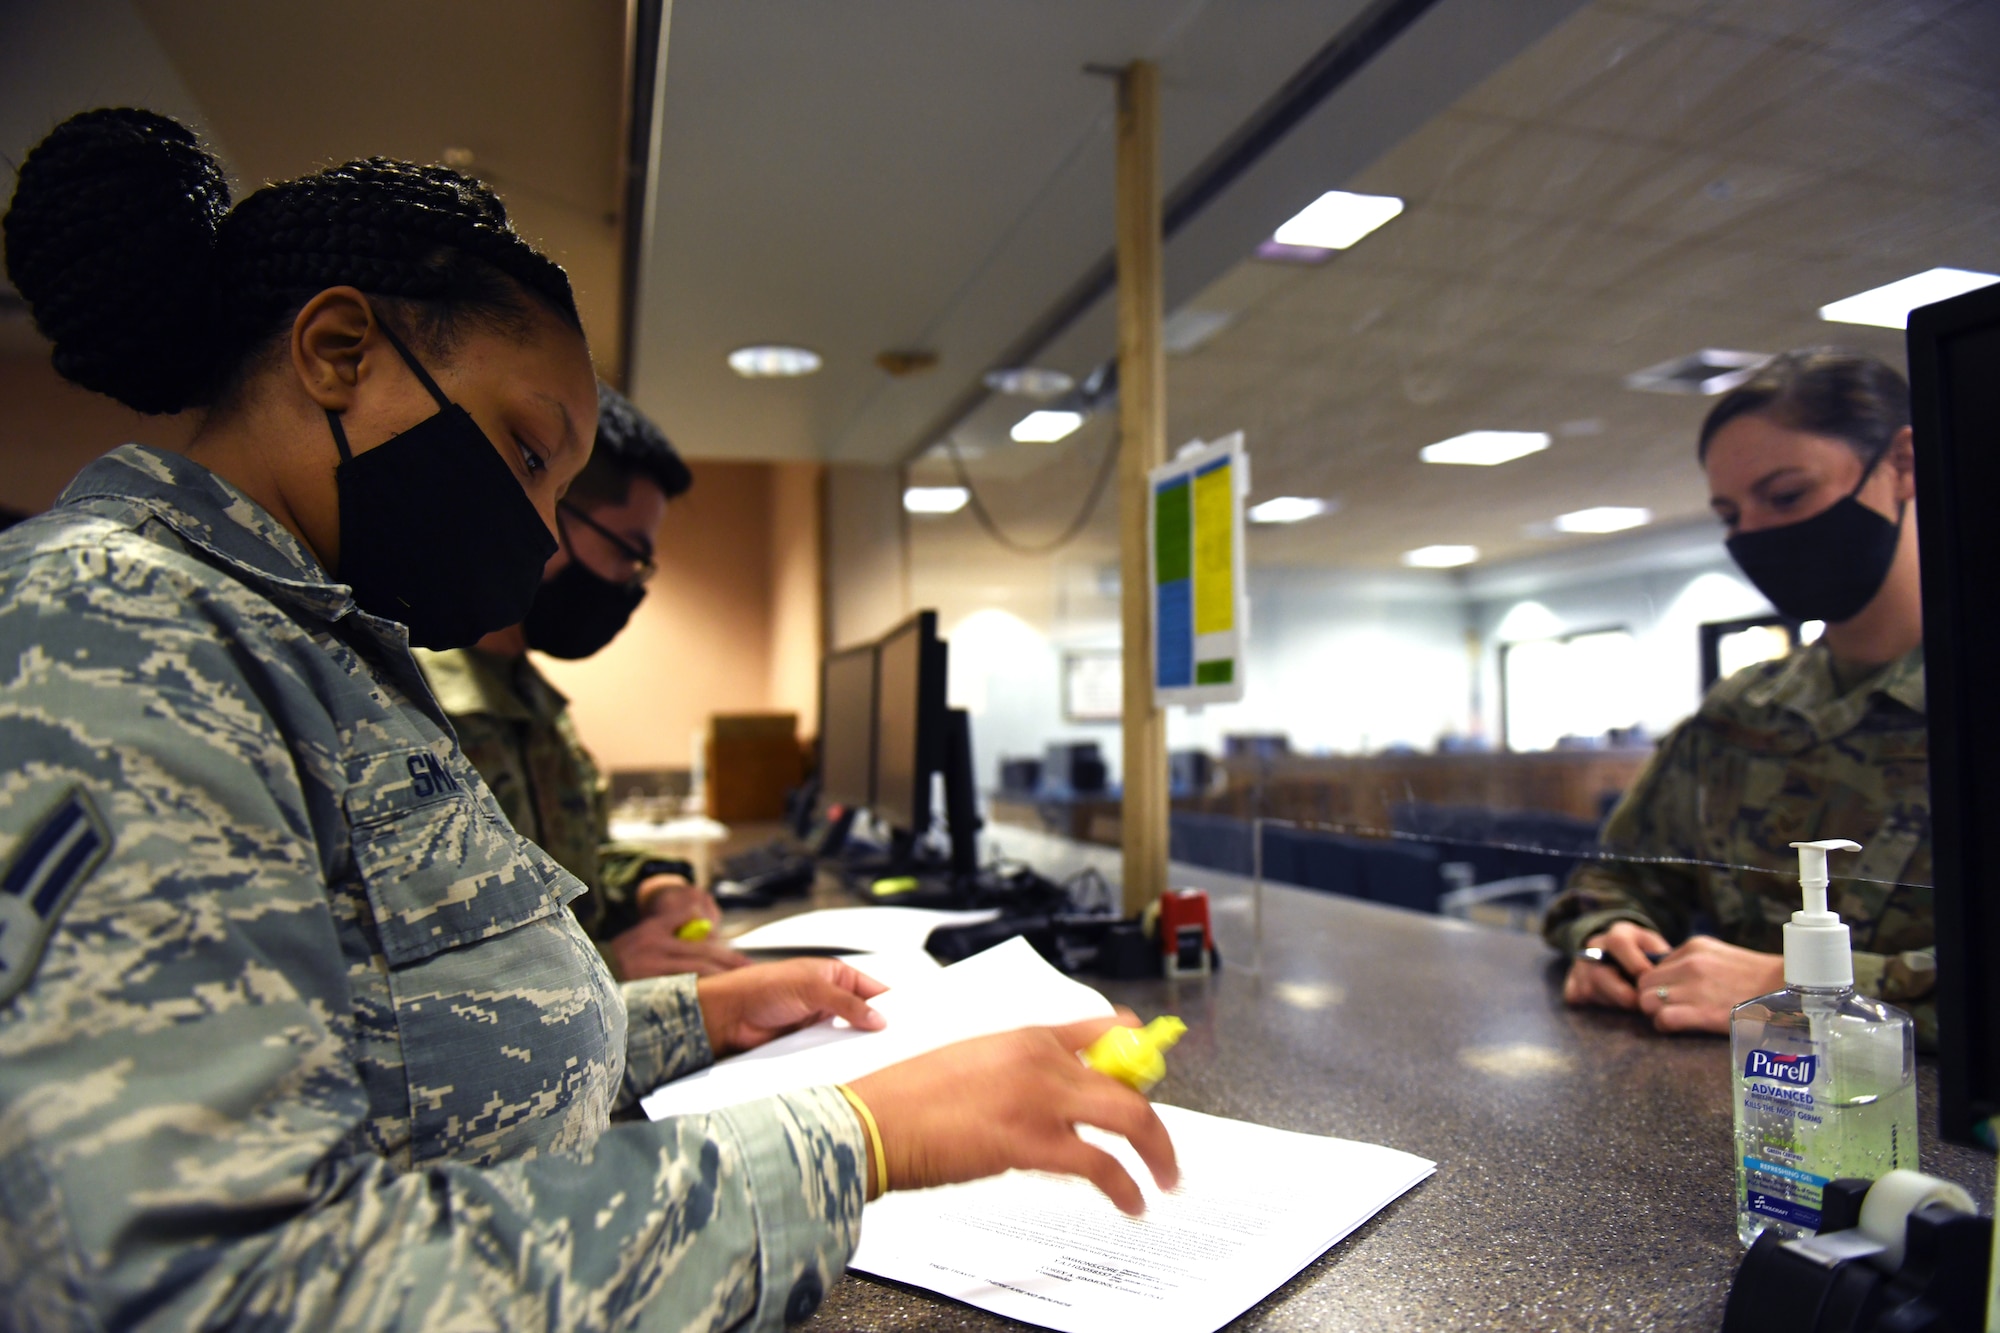 Airman 1st Class Timera Smalley (left), 9th Comptroller Squadron (CPTS) financial technician, browses through a travel voucher Sep. 9, 2020, at Beale Air Force Base, California. Smalley and two other Airmen were sent to Travis Air Force Base to assist the 60th CPTS in processing travel vouchers after the mandatory evacuations were lifted. (U.S. Air Force photo by Airman 1st Class Luis A. Ruiz-Vazquez)